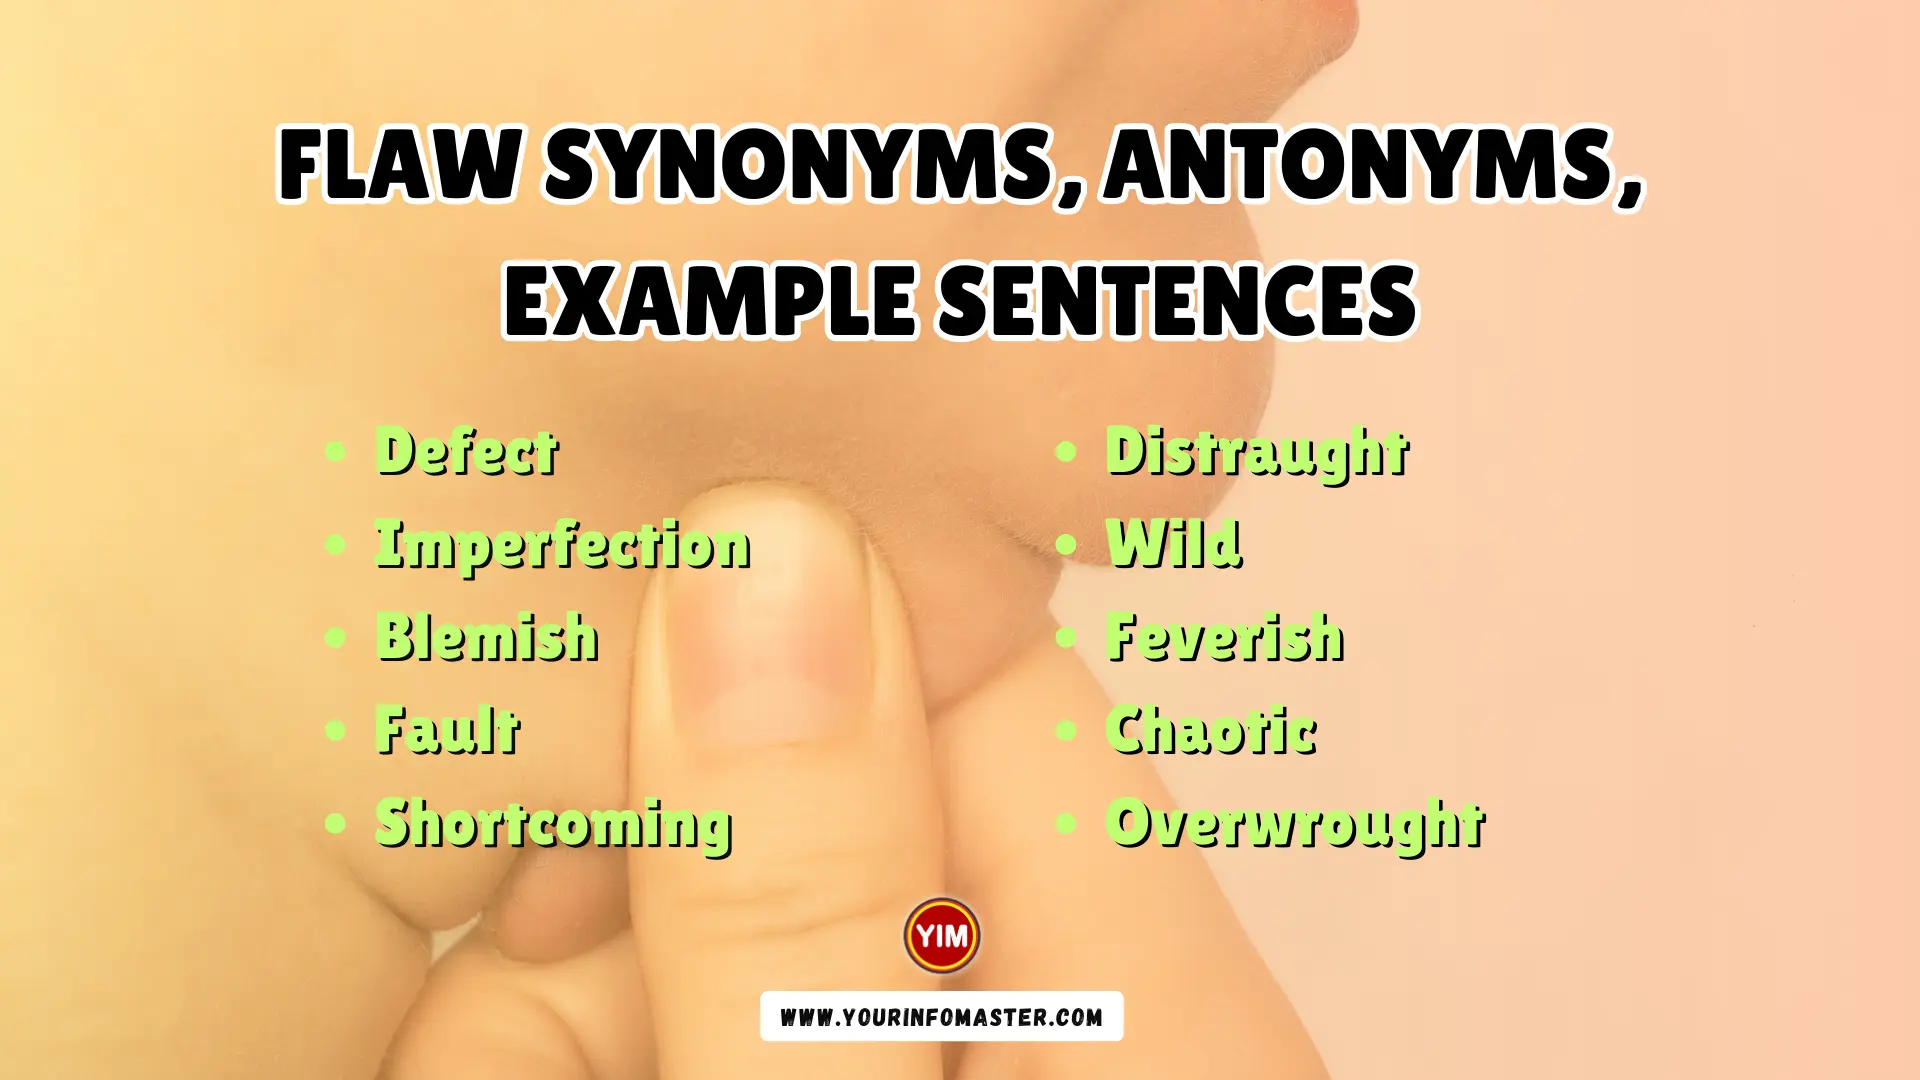 Flaw Synonyms, Antonyms, Example Sentences